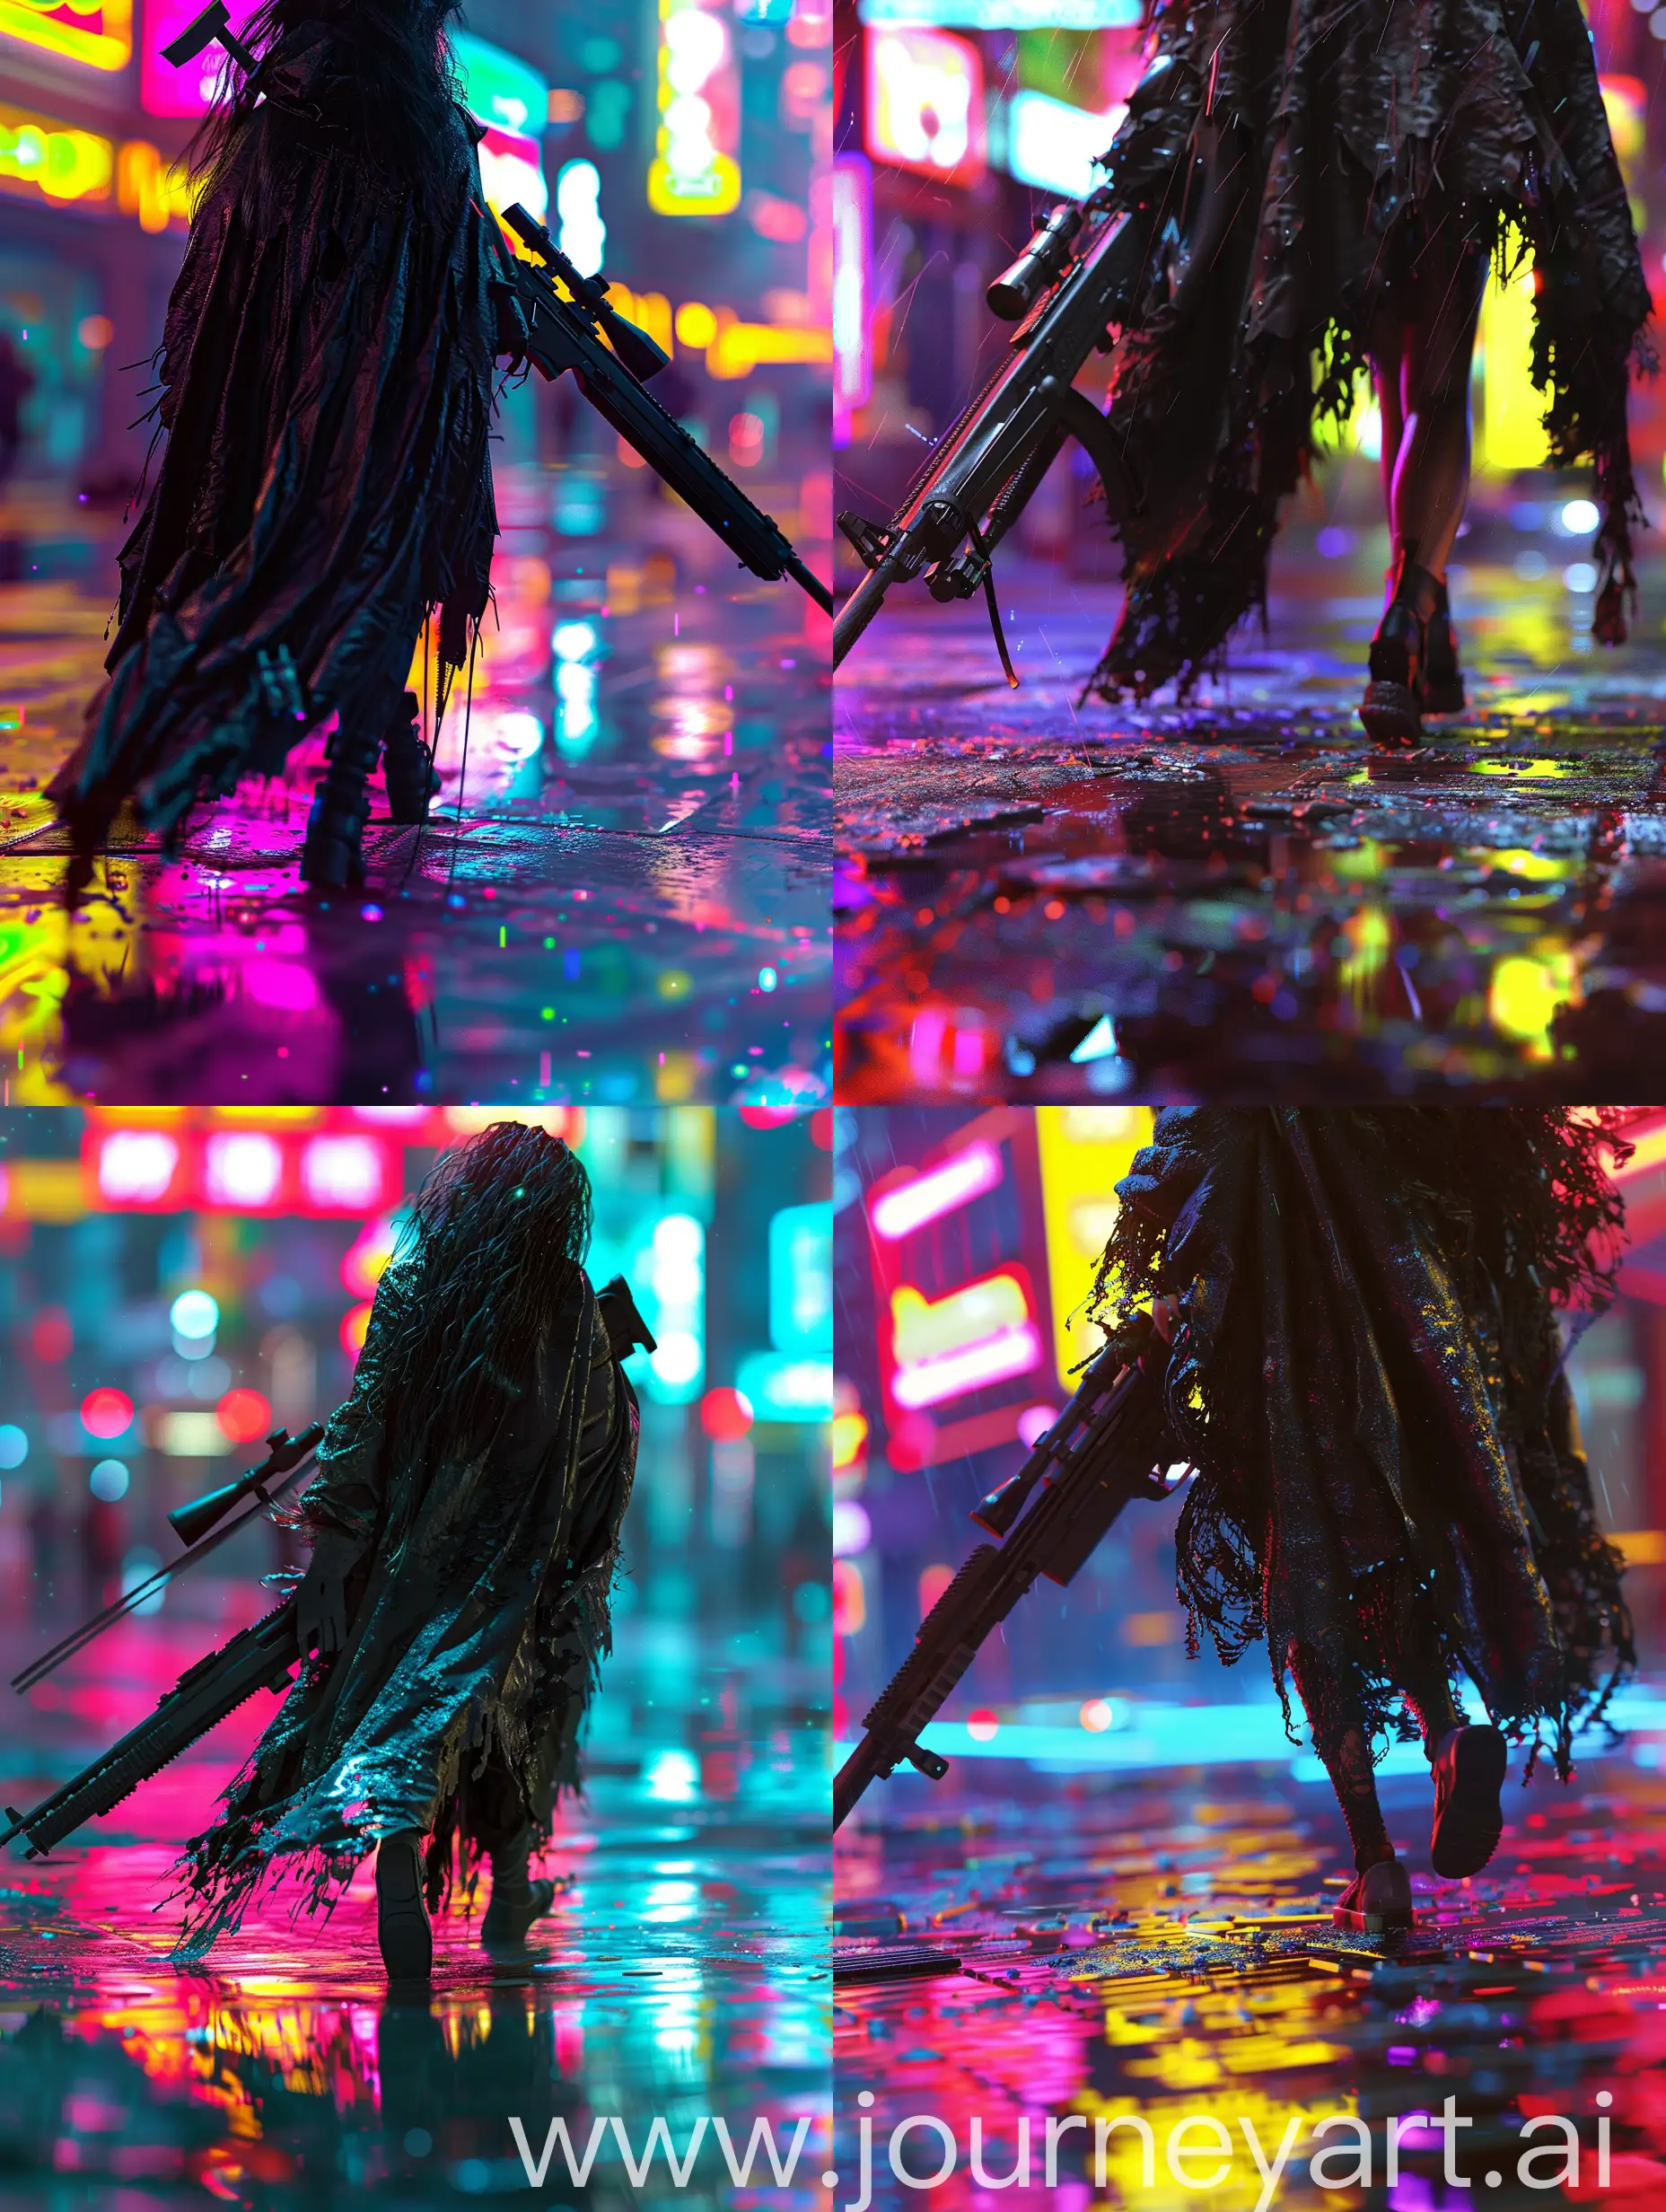 a mid close up dynamic cinematic super high quality image of a cyberpunk female wearing an eery black tattered black cloak carrying a sniper rifle striding through the vibrantly lit up city street, adding to the  ambiance of the vibrant city lights. Cinematic rim lighting highlights every detail of the scene, from the gleaming rifle to the neon-lit reflections on the gritty floor. Each element is rendered in stunning high definition, capturing the essence of the cyberpunk world with unparalleled realism.